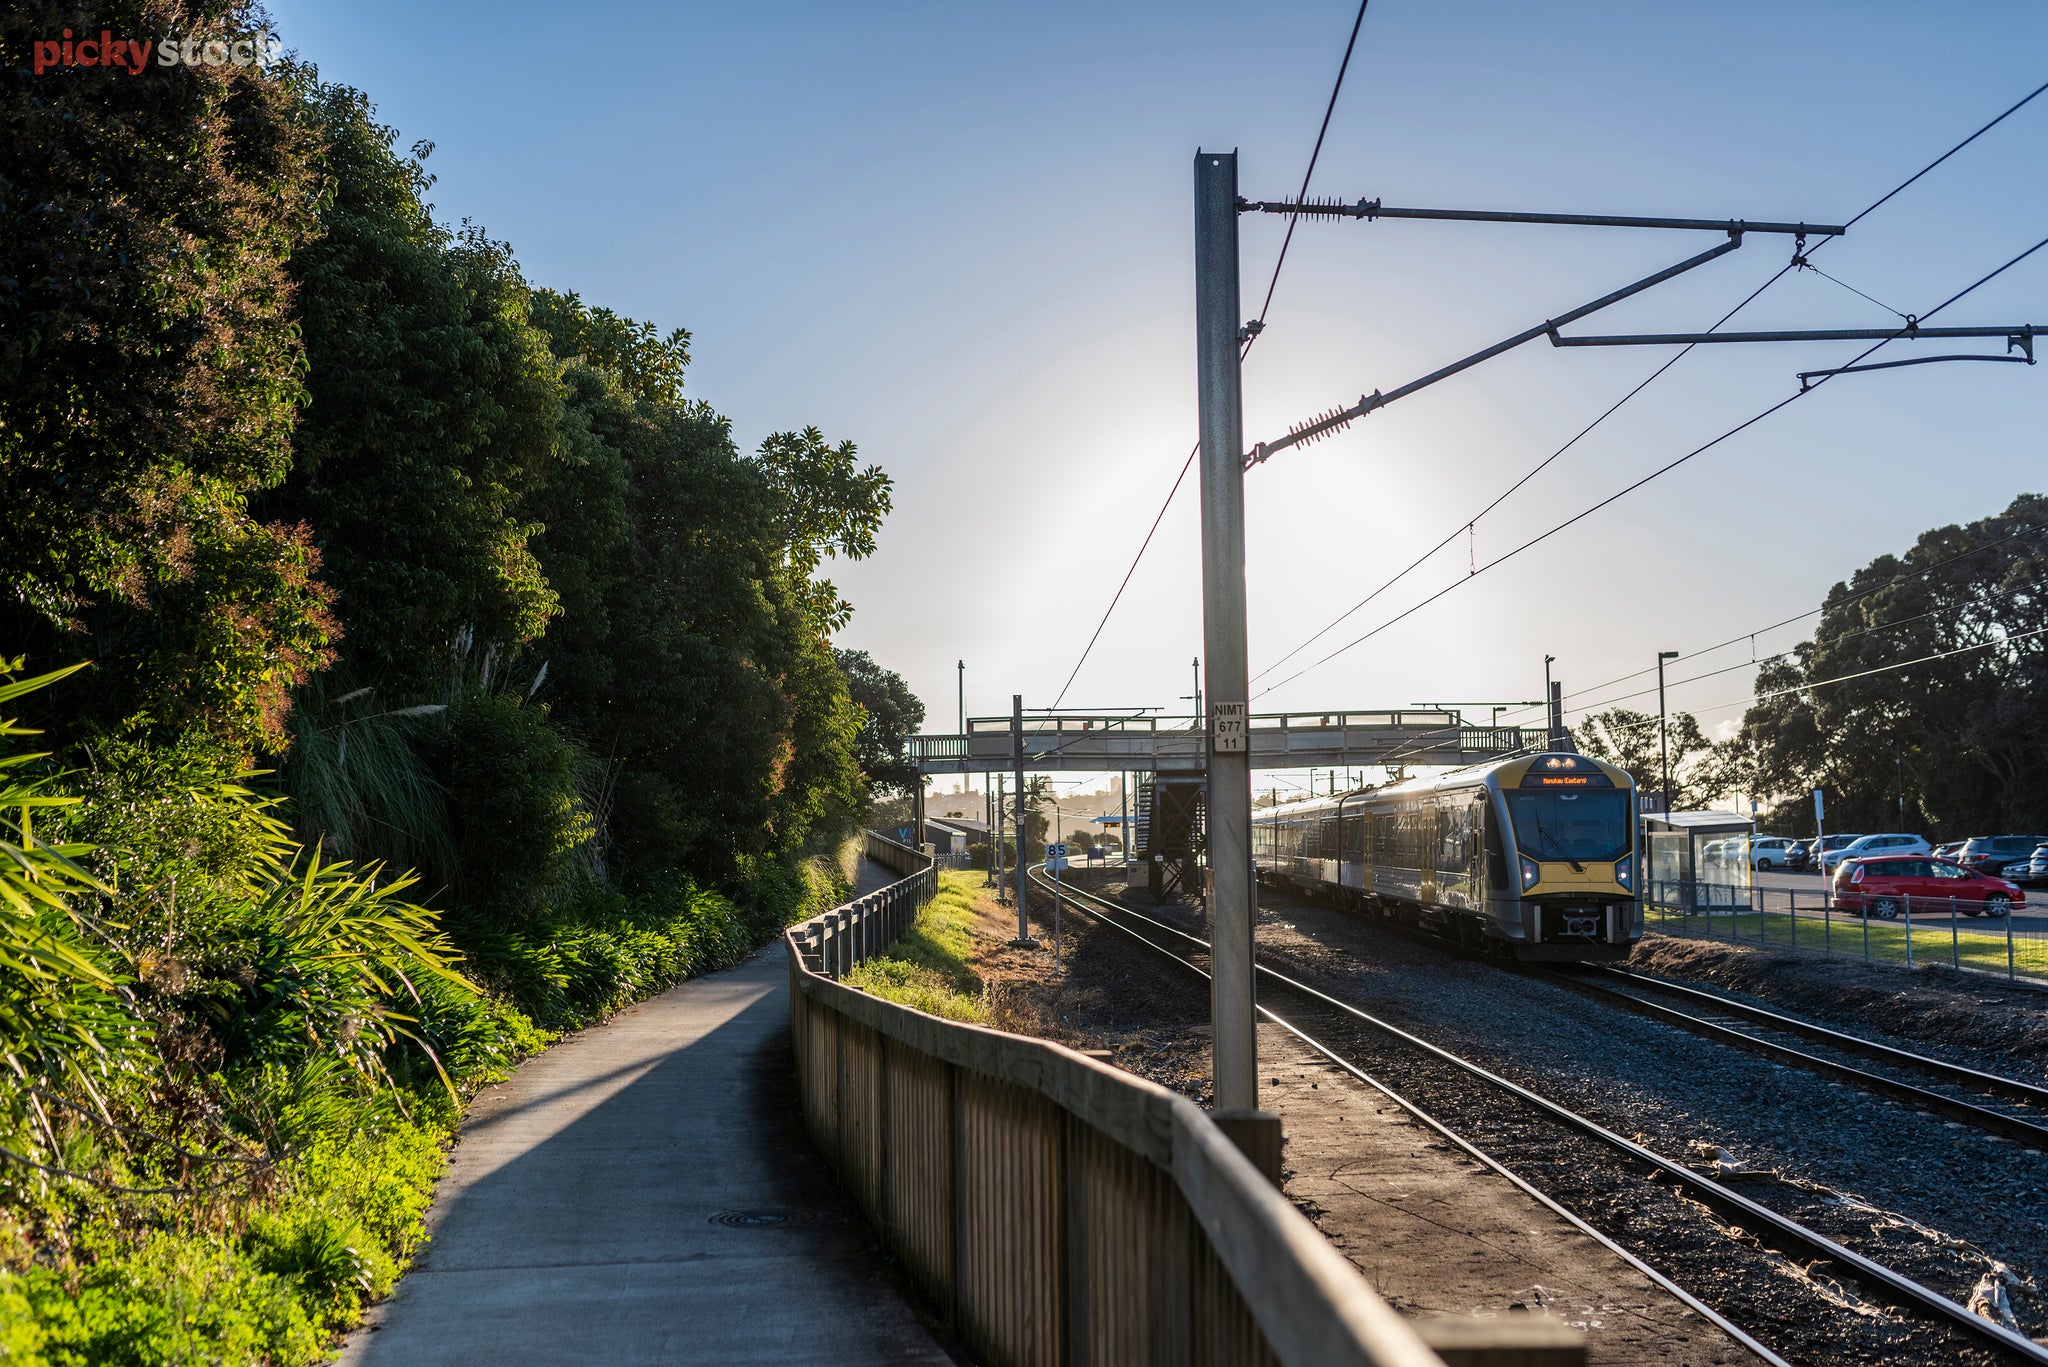 Early morning blue sky becomes white on the horizon where the sun is rising. On the right a train has stopped at a station. There is electric cables strung above the train and the tracks. On the left a bank has trees and flax following a concrete walking path and wooden fence. The path leads up to an over bridge across the tracks and cables. Giving access to the train platform. On the far right cars a parked. 